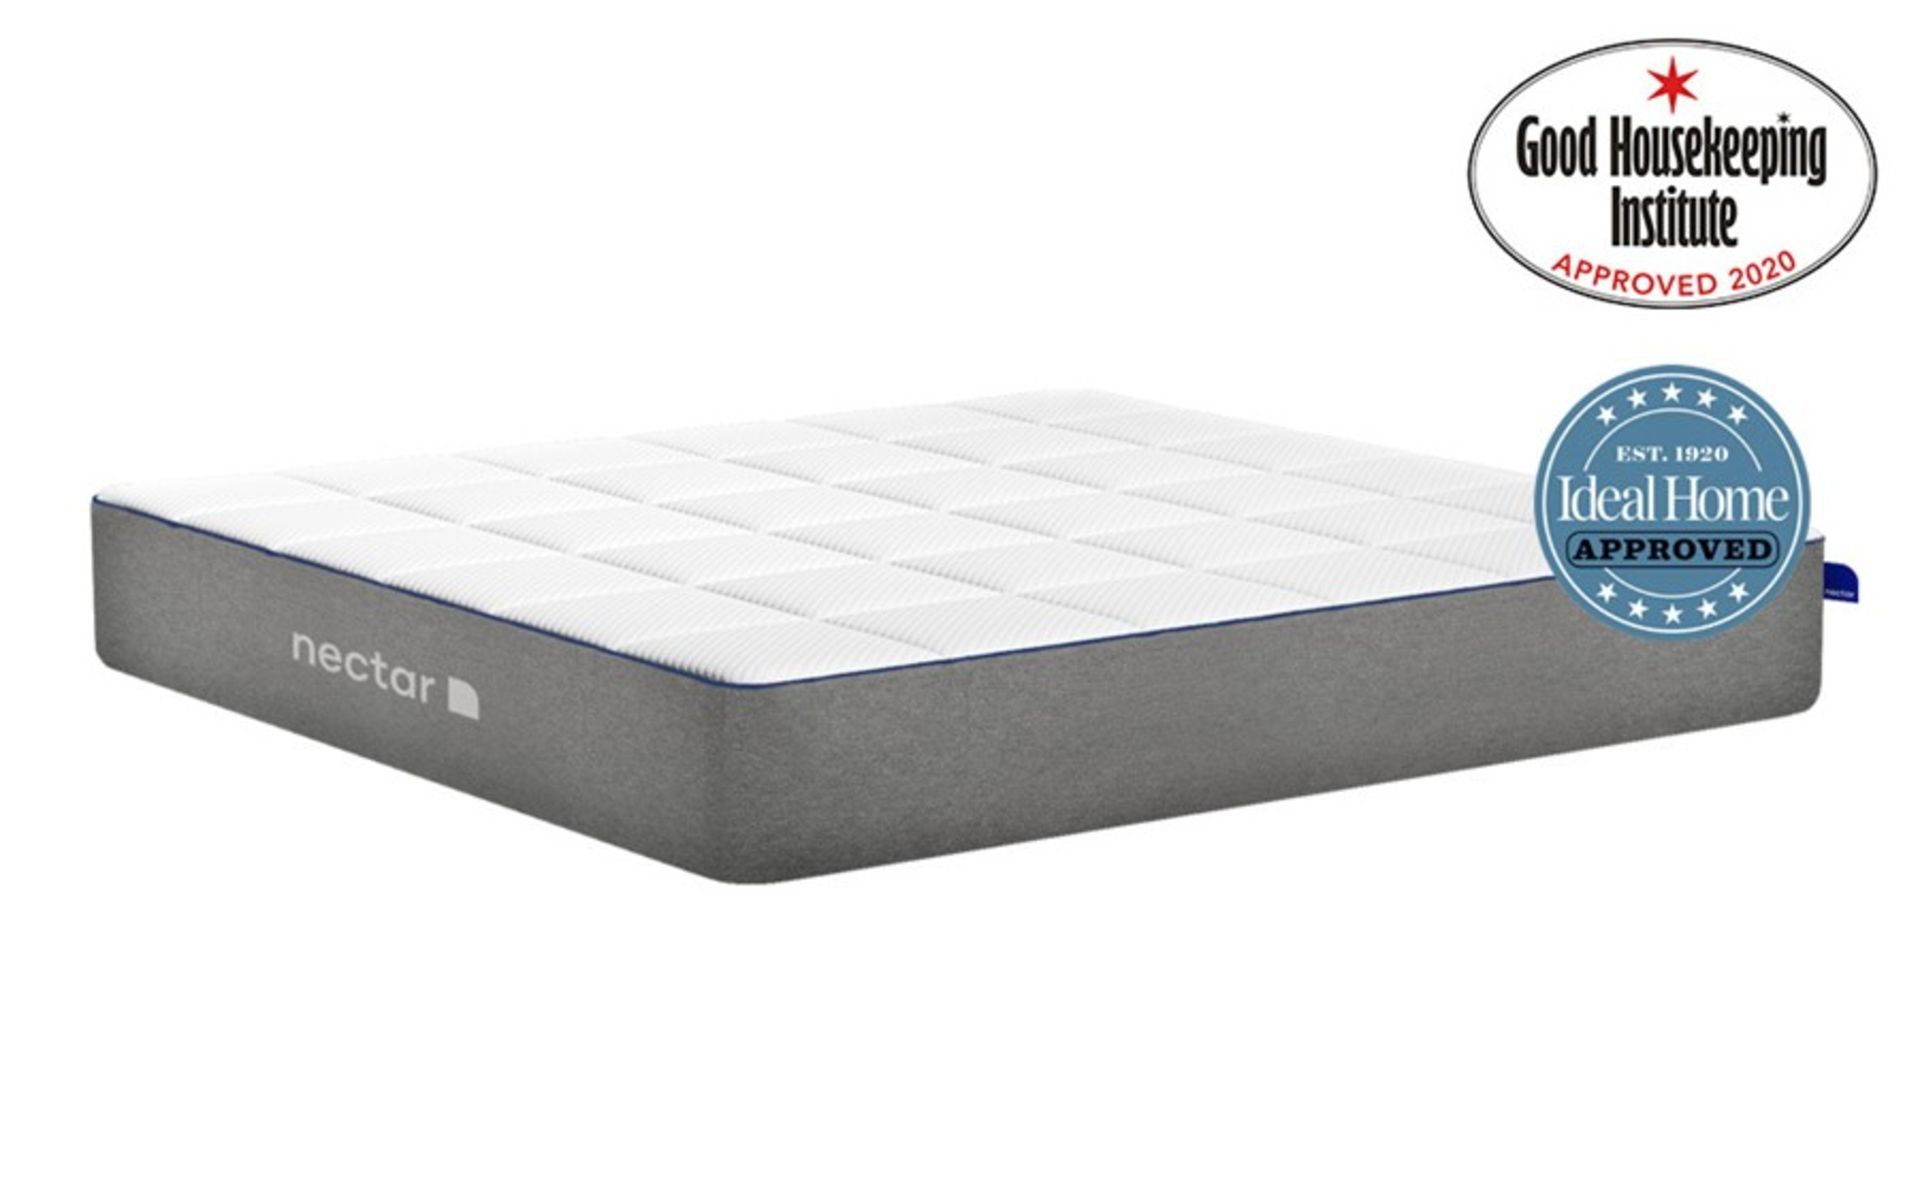 Nectar Professionally Refurbished Smart Pressure Relieving Double size Memory Foam Mattress, This